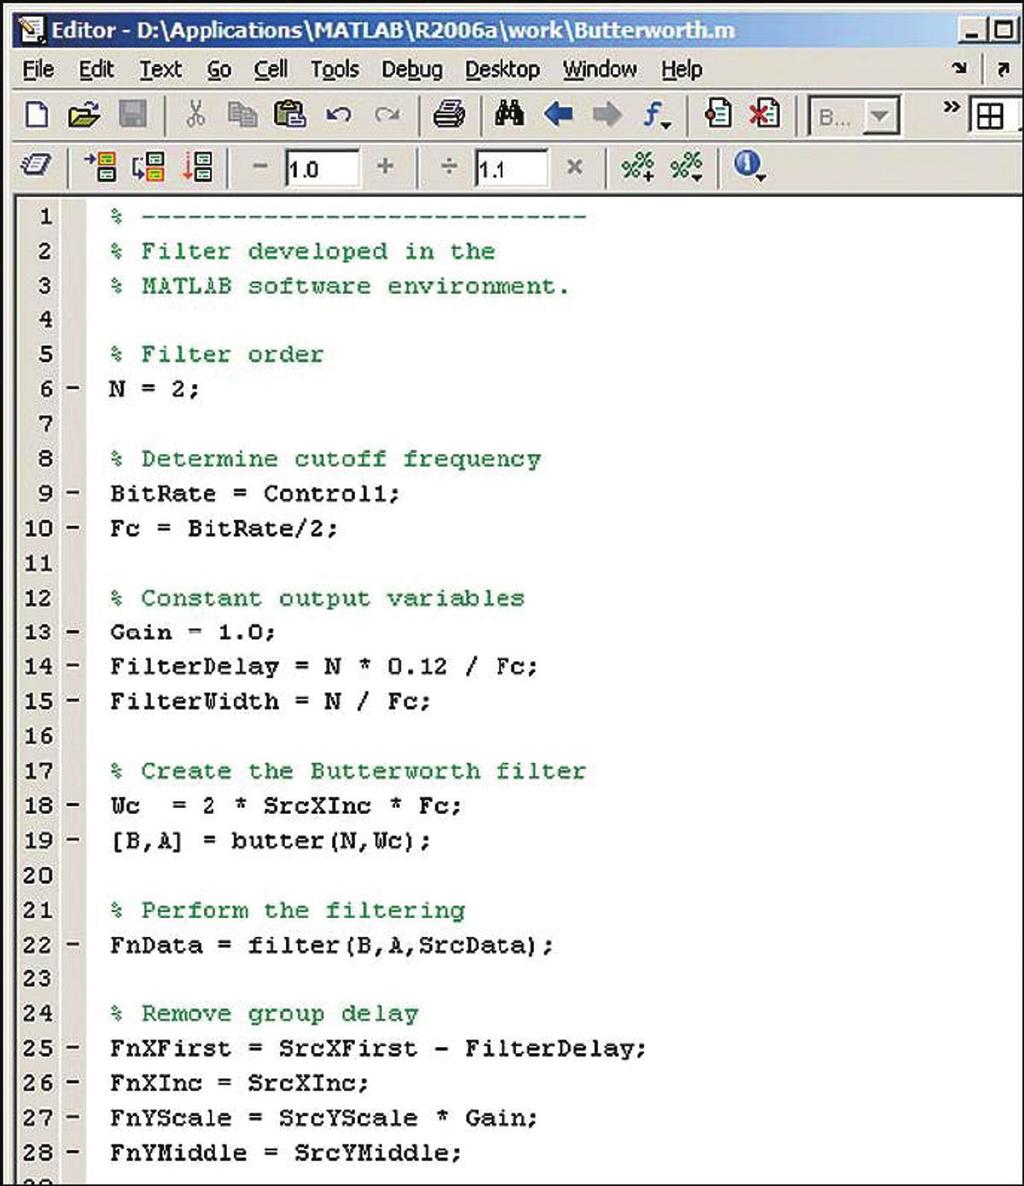 The XML file defines the components of the graphical user interface that appears on the Math dialog box shown in the right side in Figure 3.